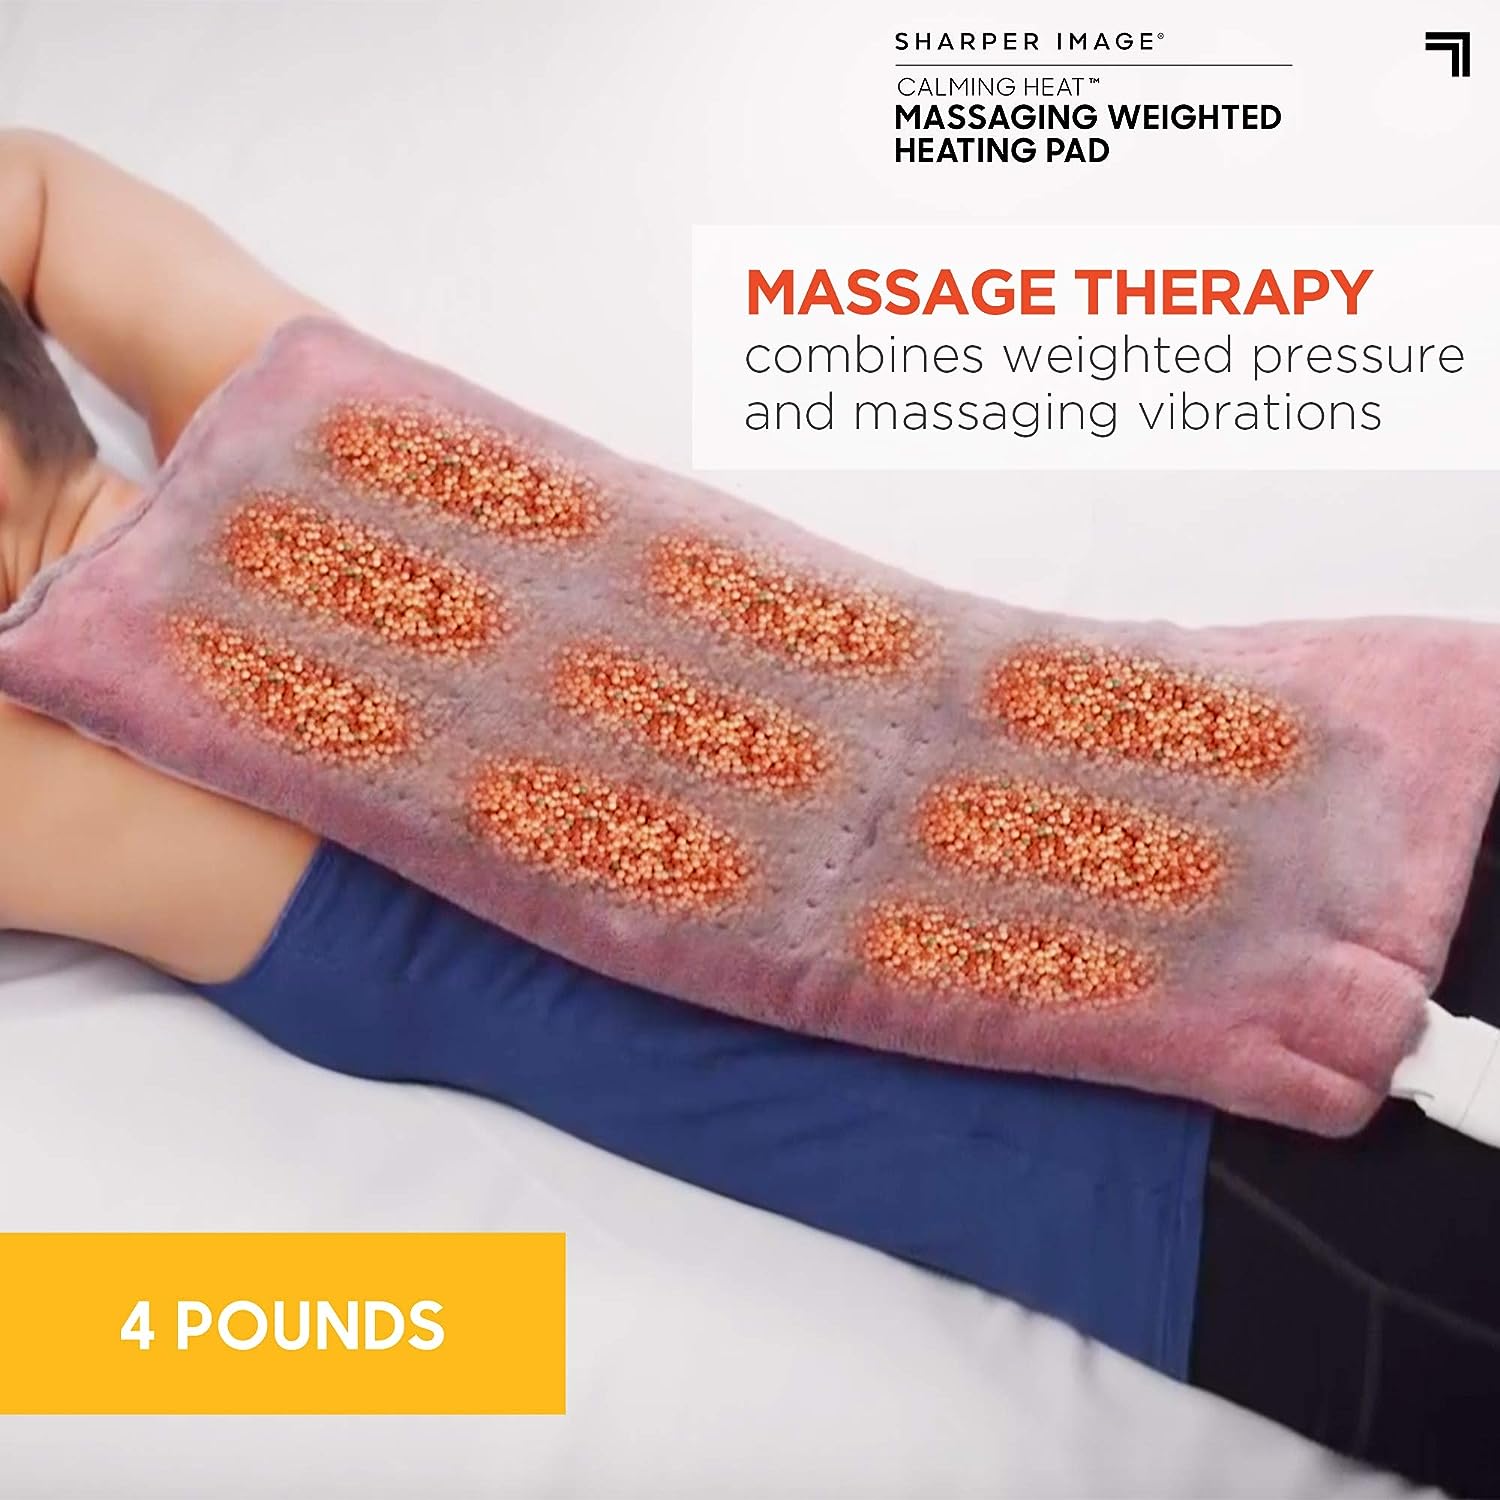 A person getting massage therapy with the help of Massaging Weighted Heating Pad